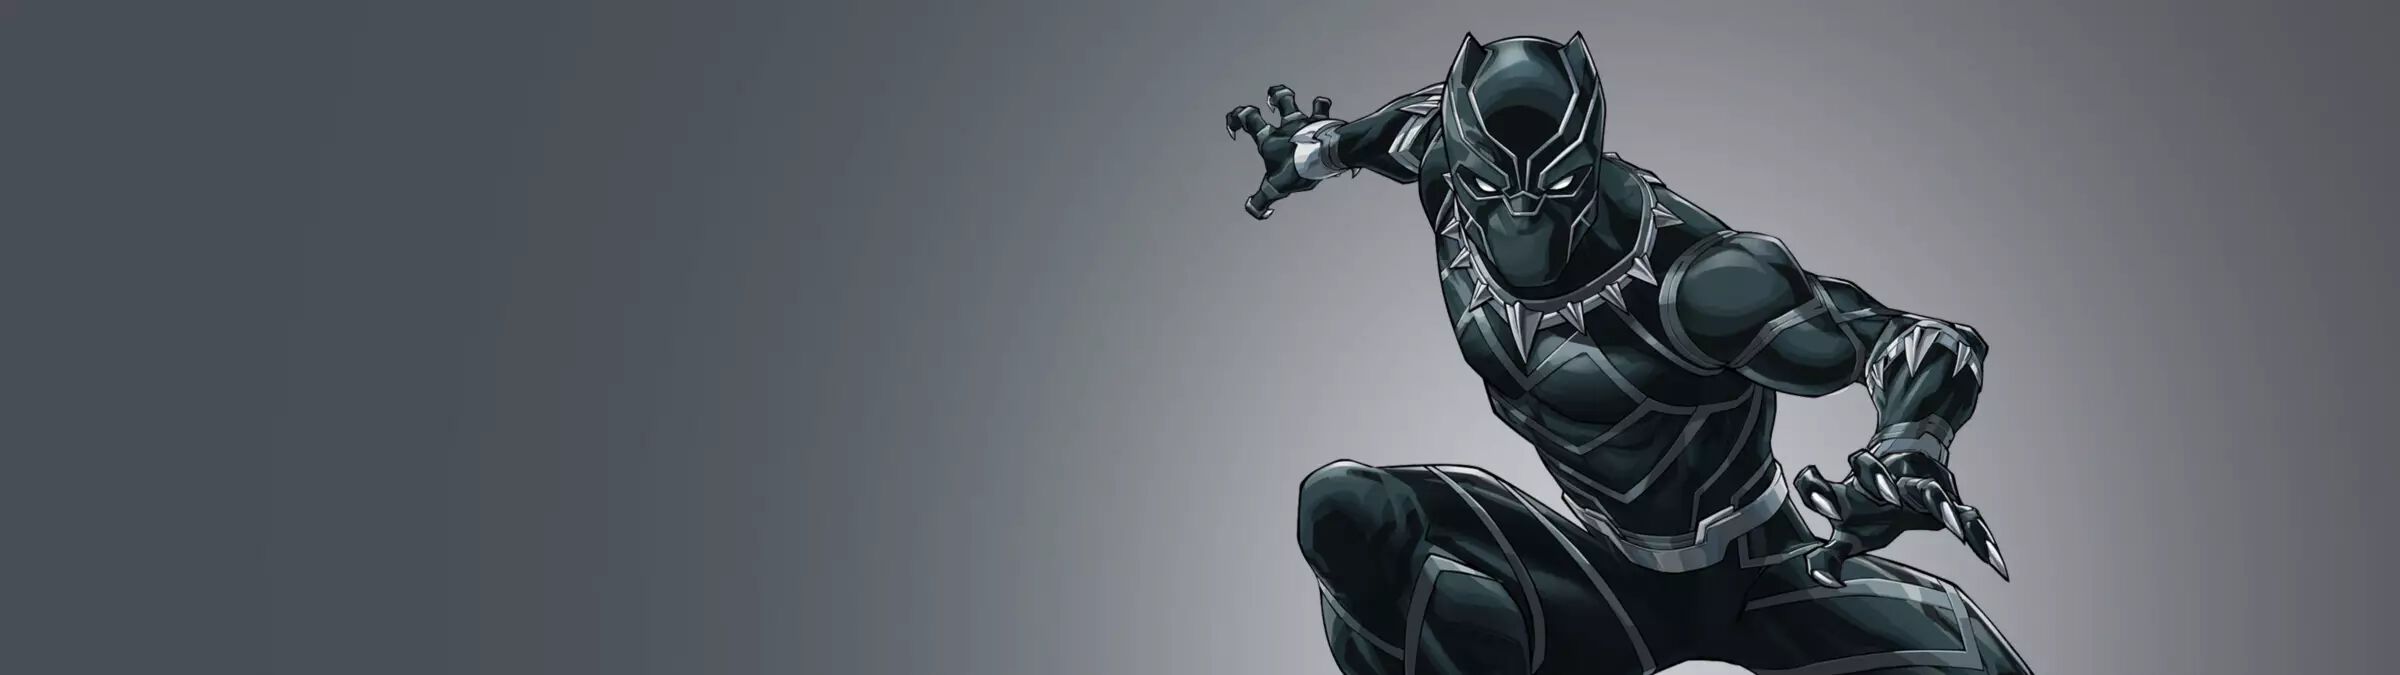 Black Panther Character Banner